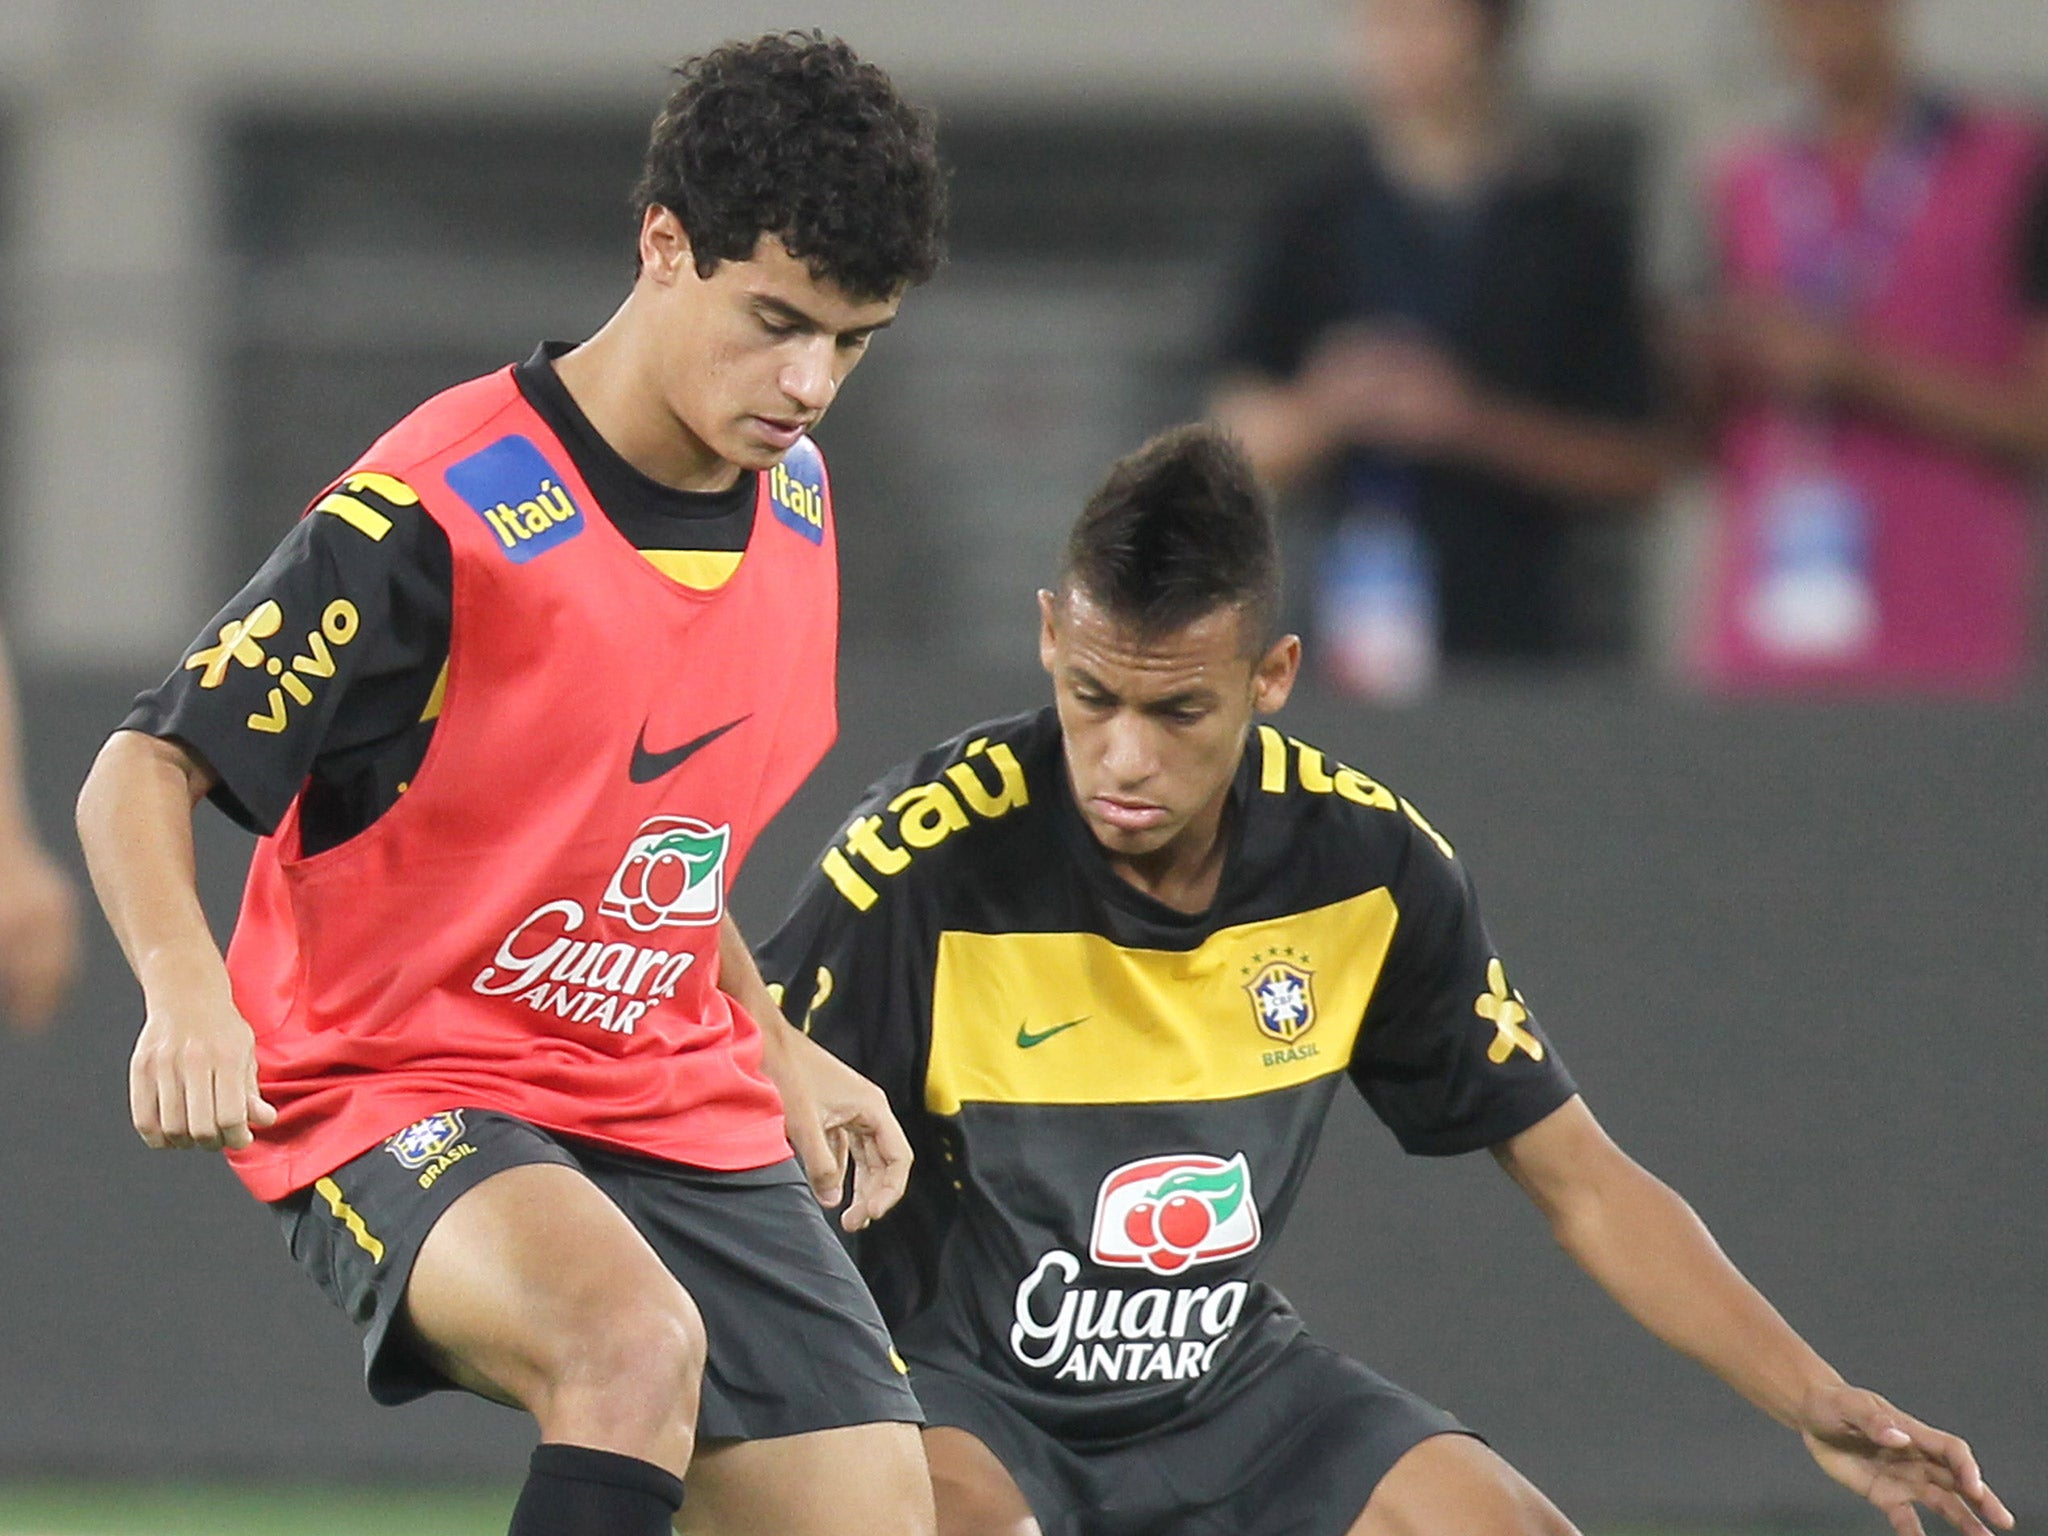 Neymar and Philippe Coutinho played alongside each other regularly at international youth level